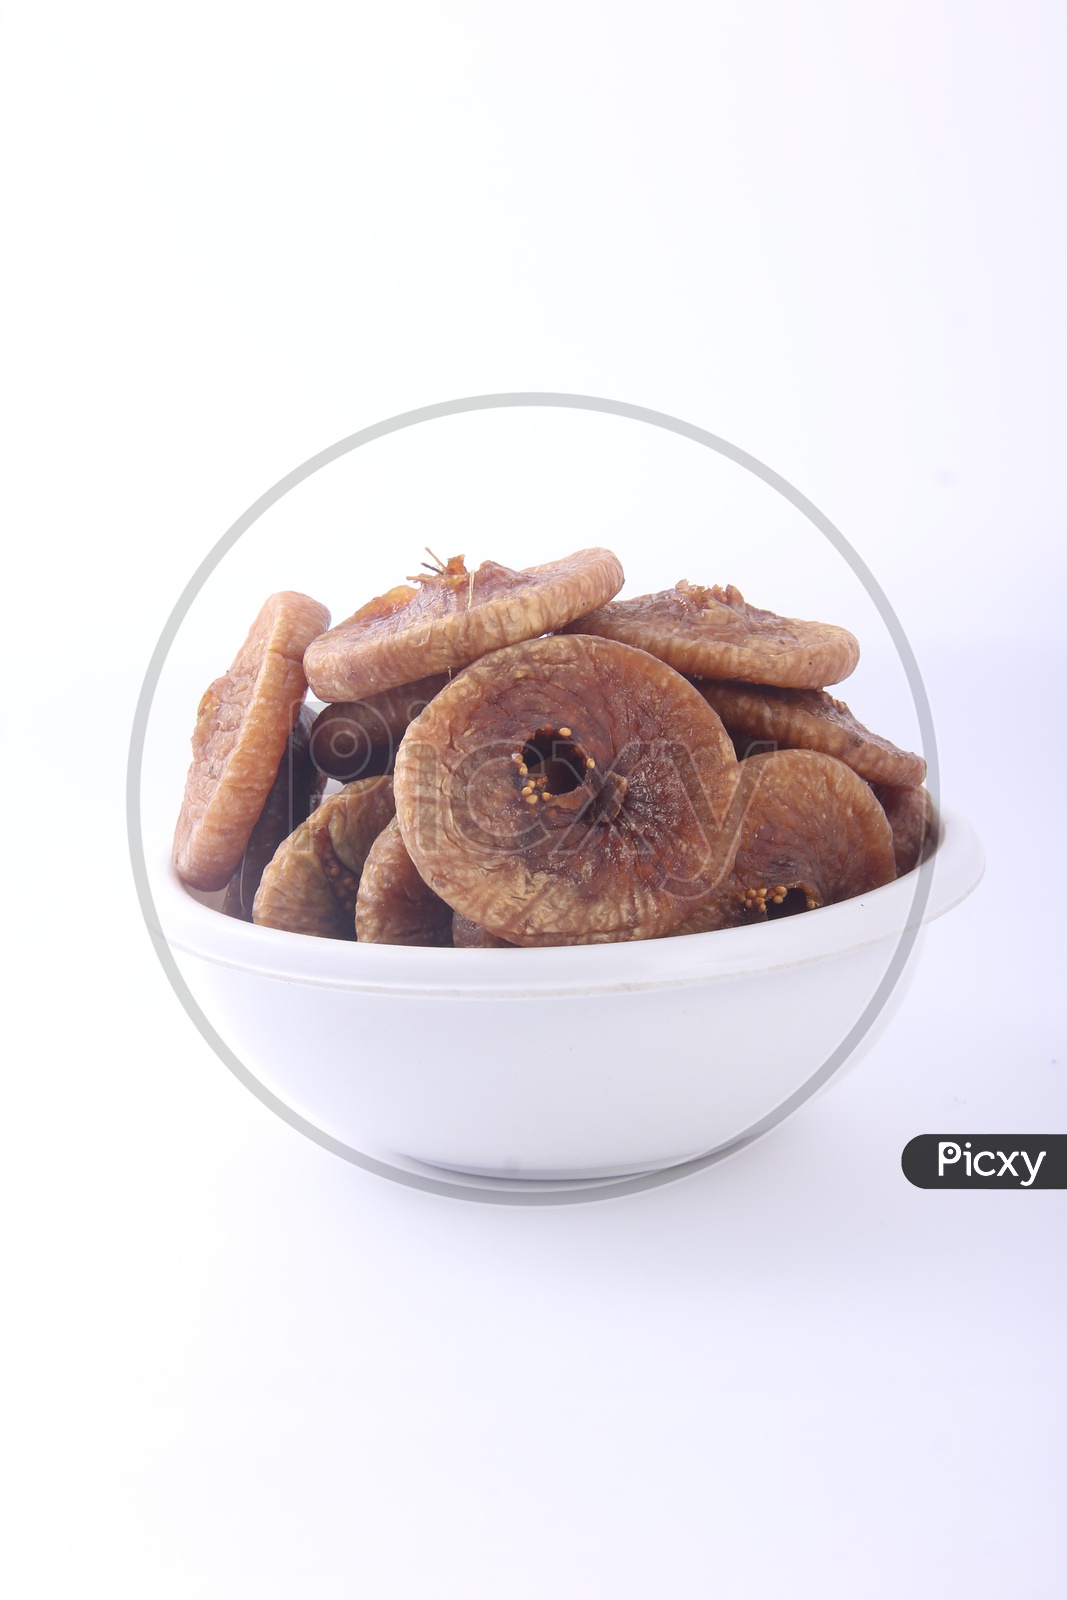 Dried Fig or Anjeera  in a Bowl on an Isolated White Background